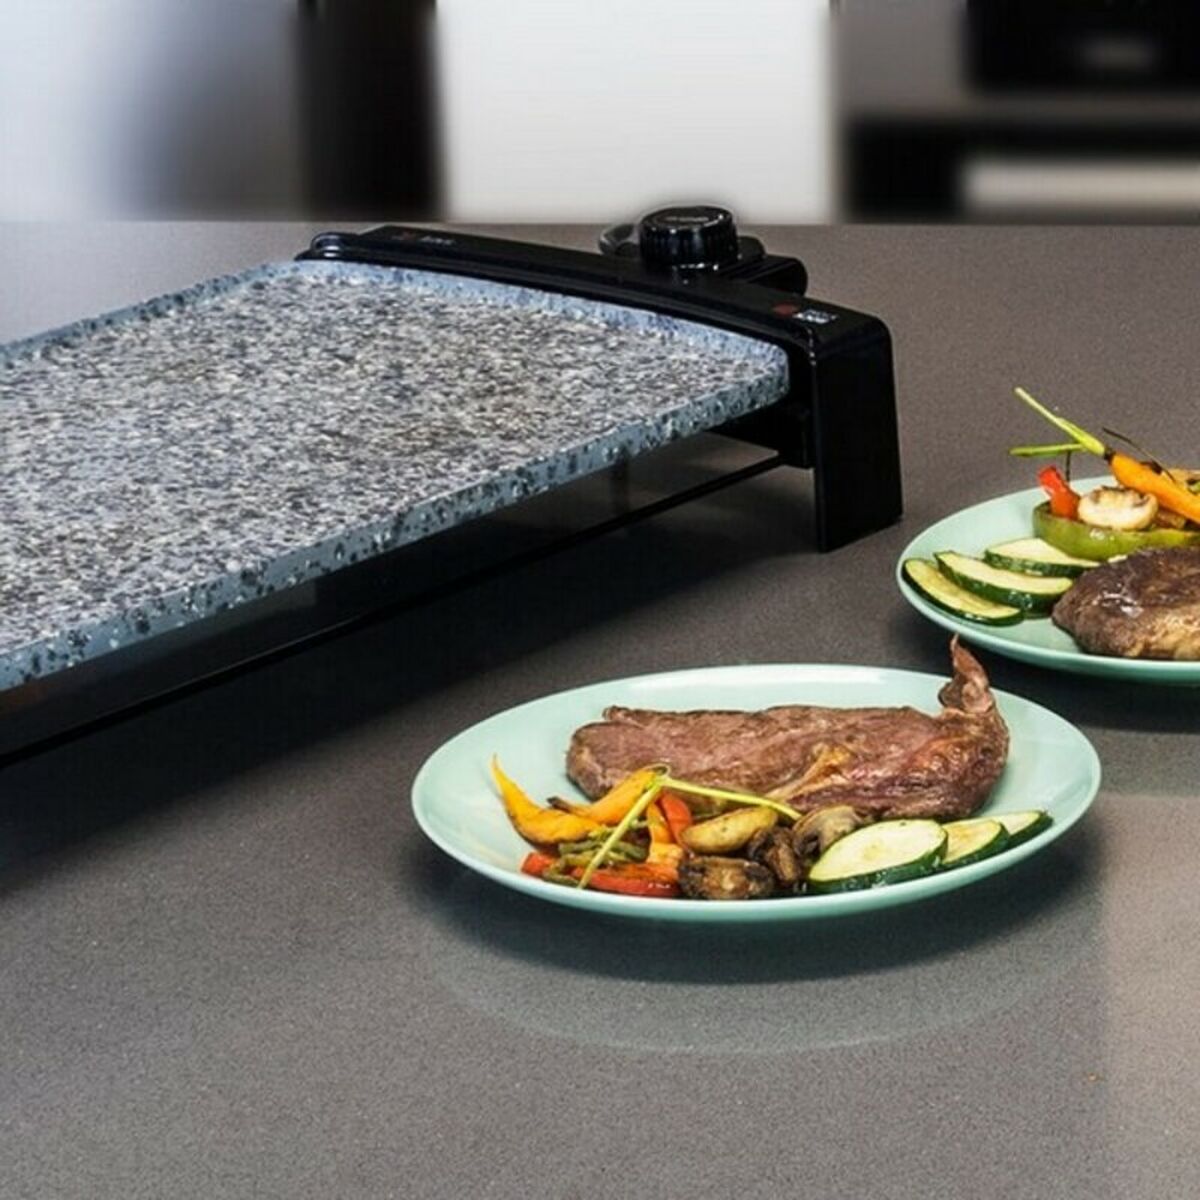 Grillpfanne Cecotec Rock and Water 2500 2150W - AWK Flagship